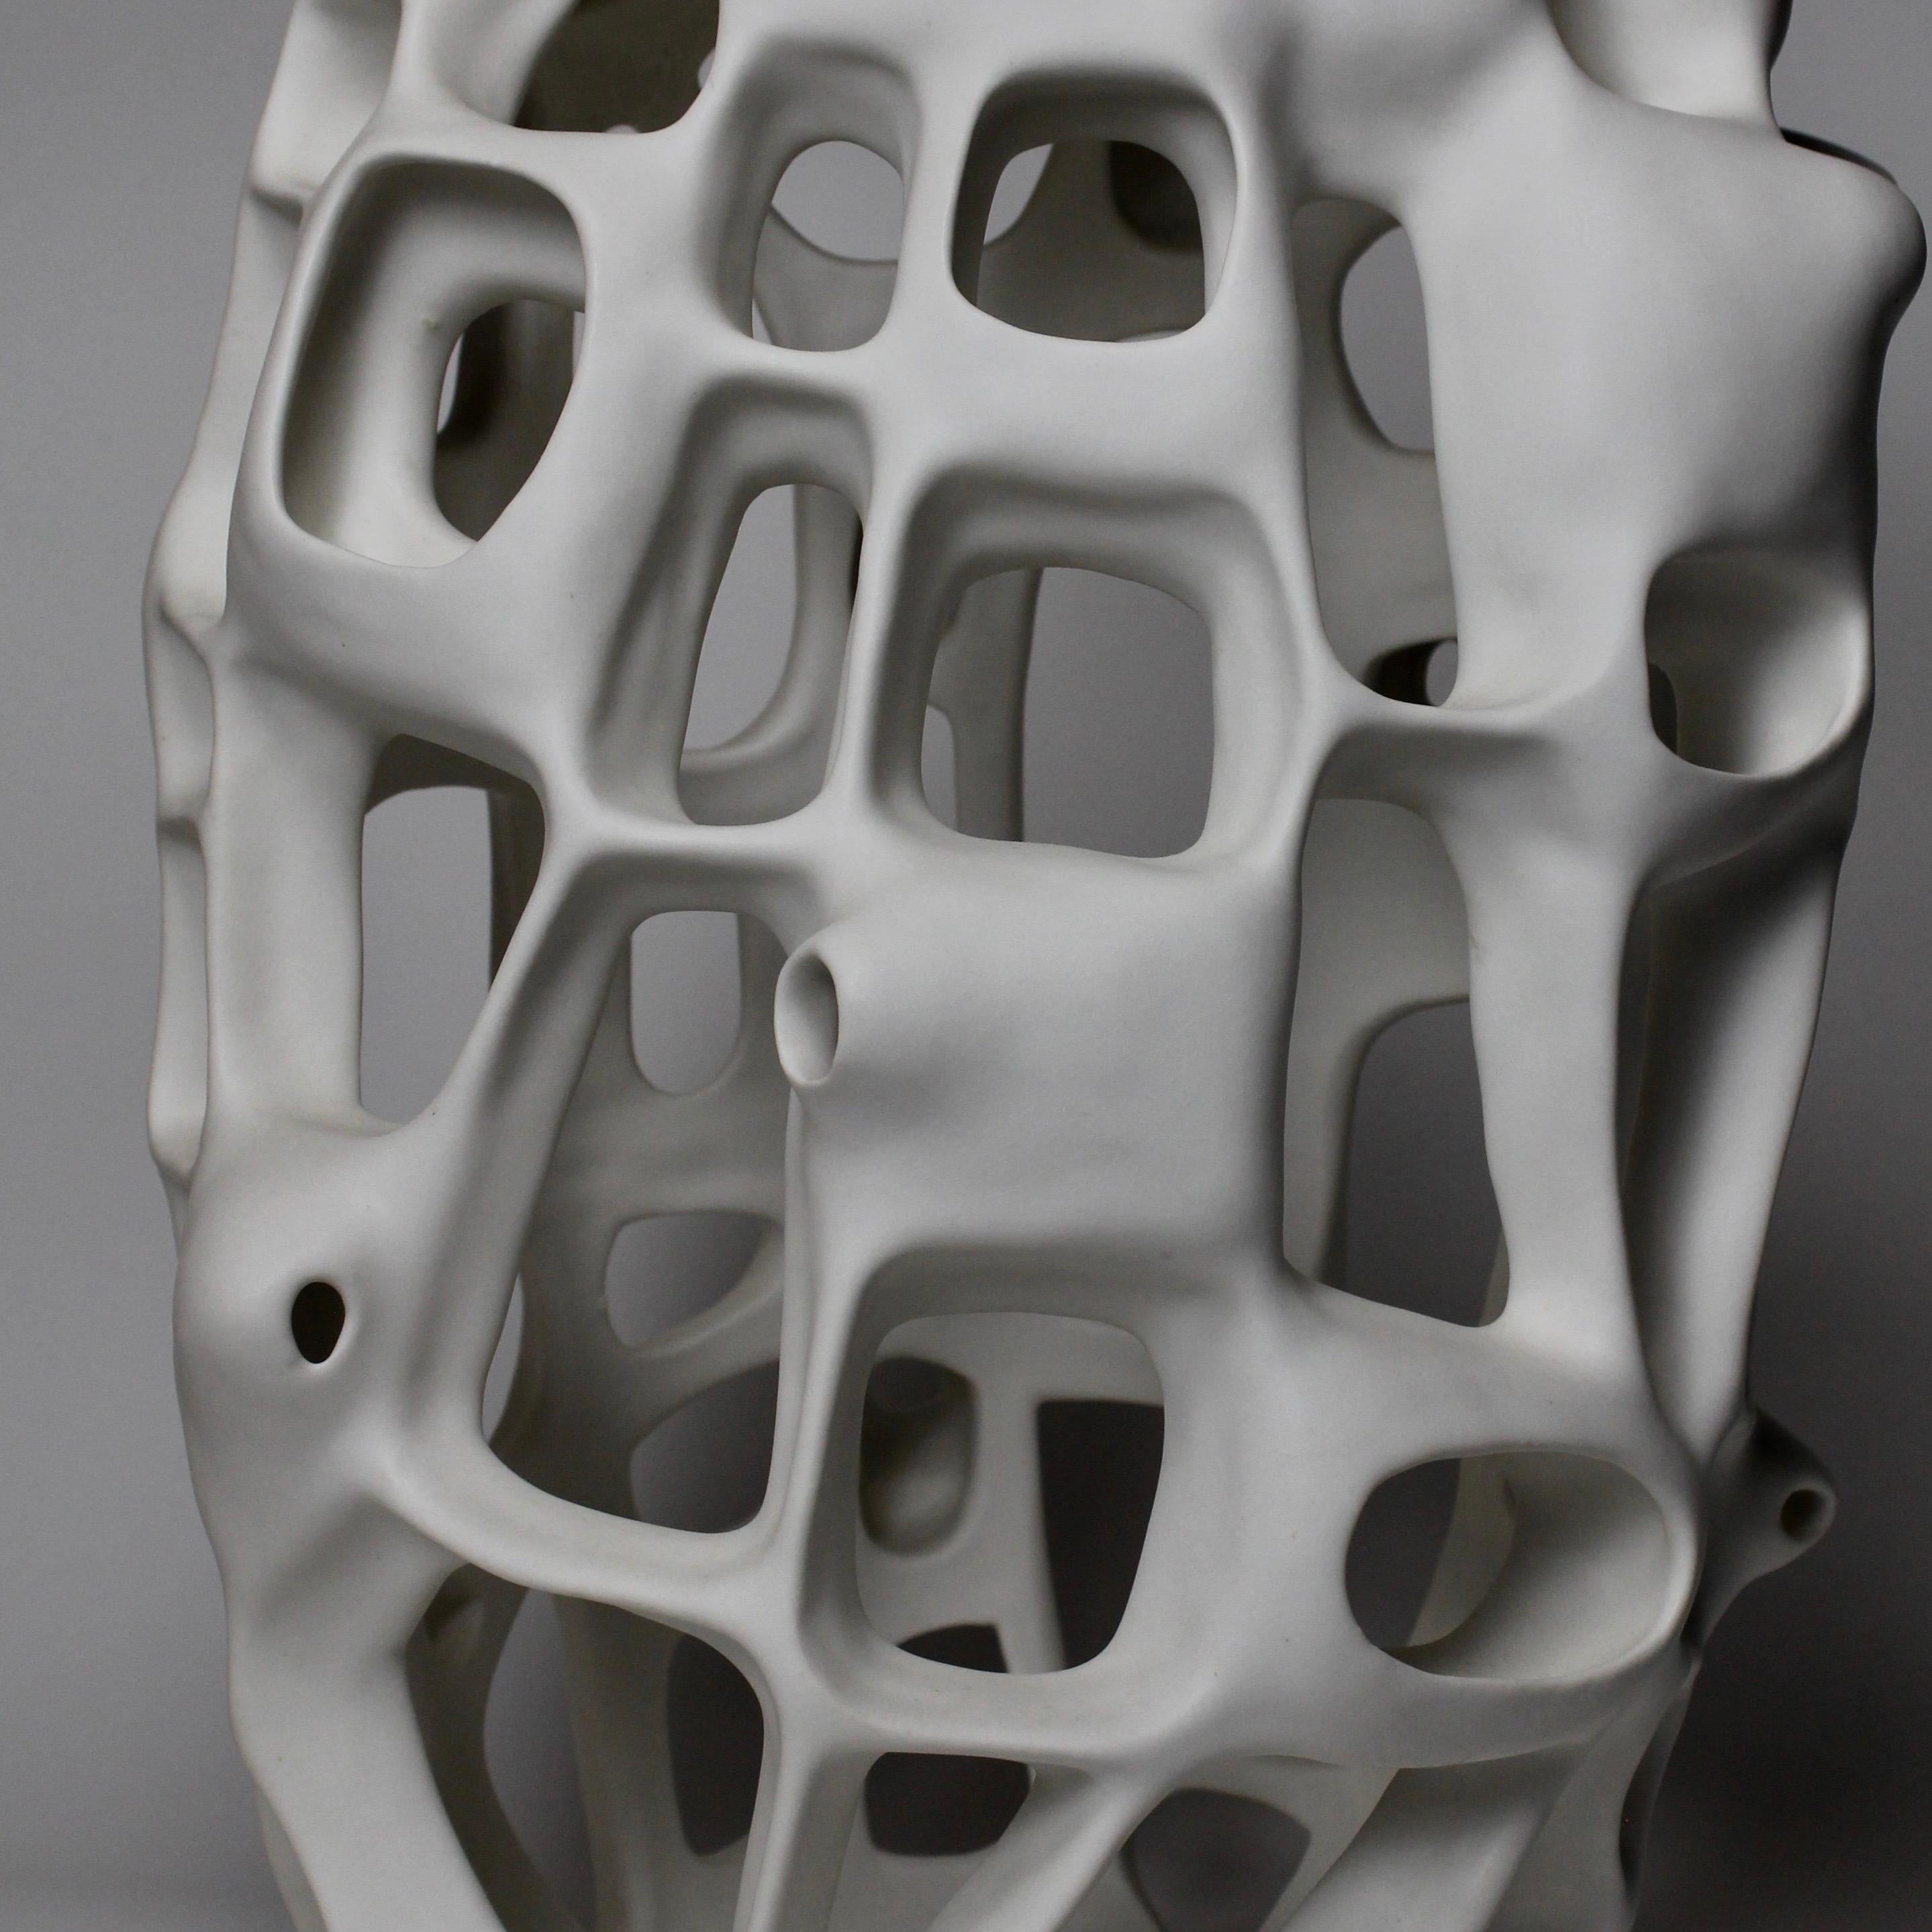 Untitled #3751 - Porcelain geometric white sculpture  - Contemporary Sculpture by Joan Lurie